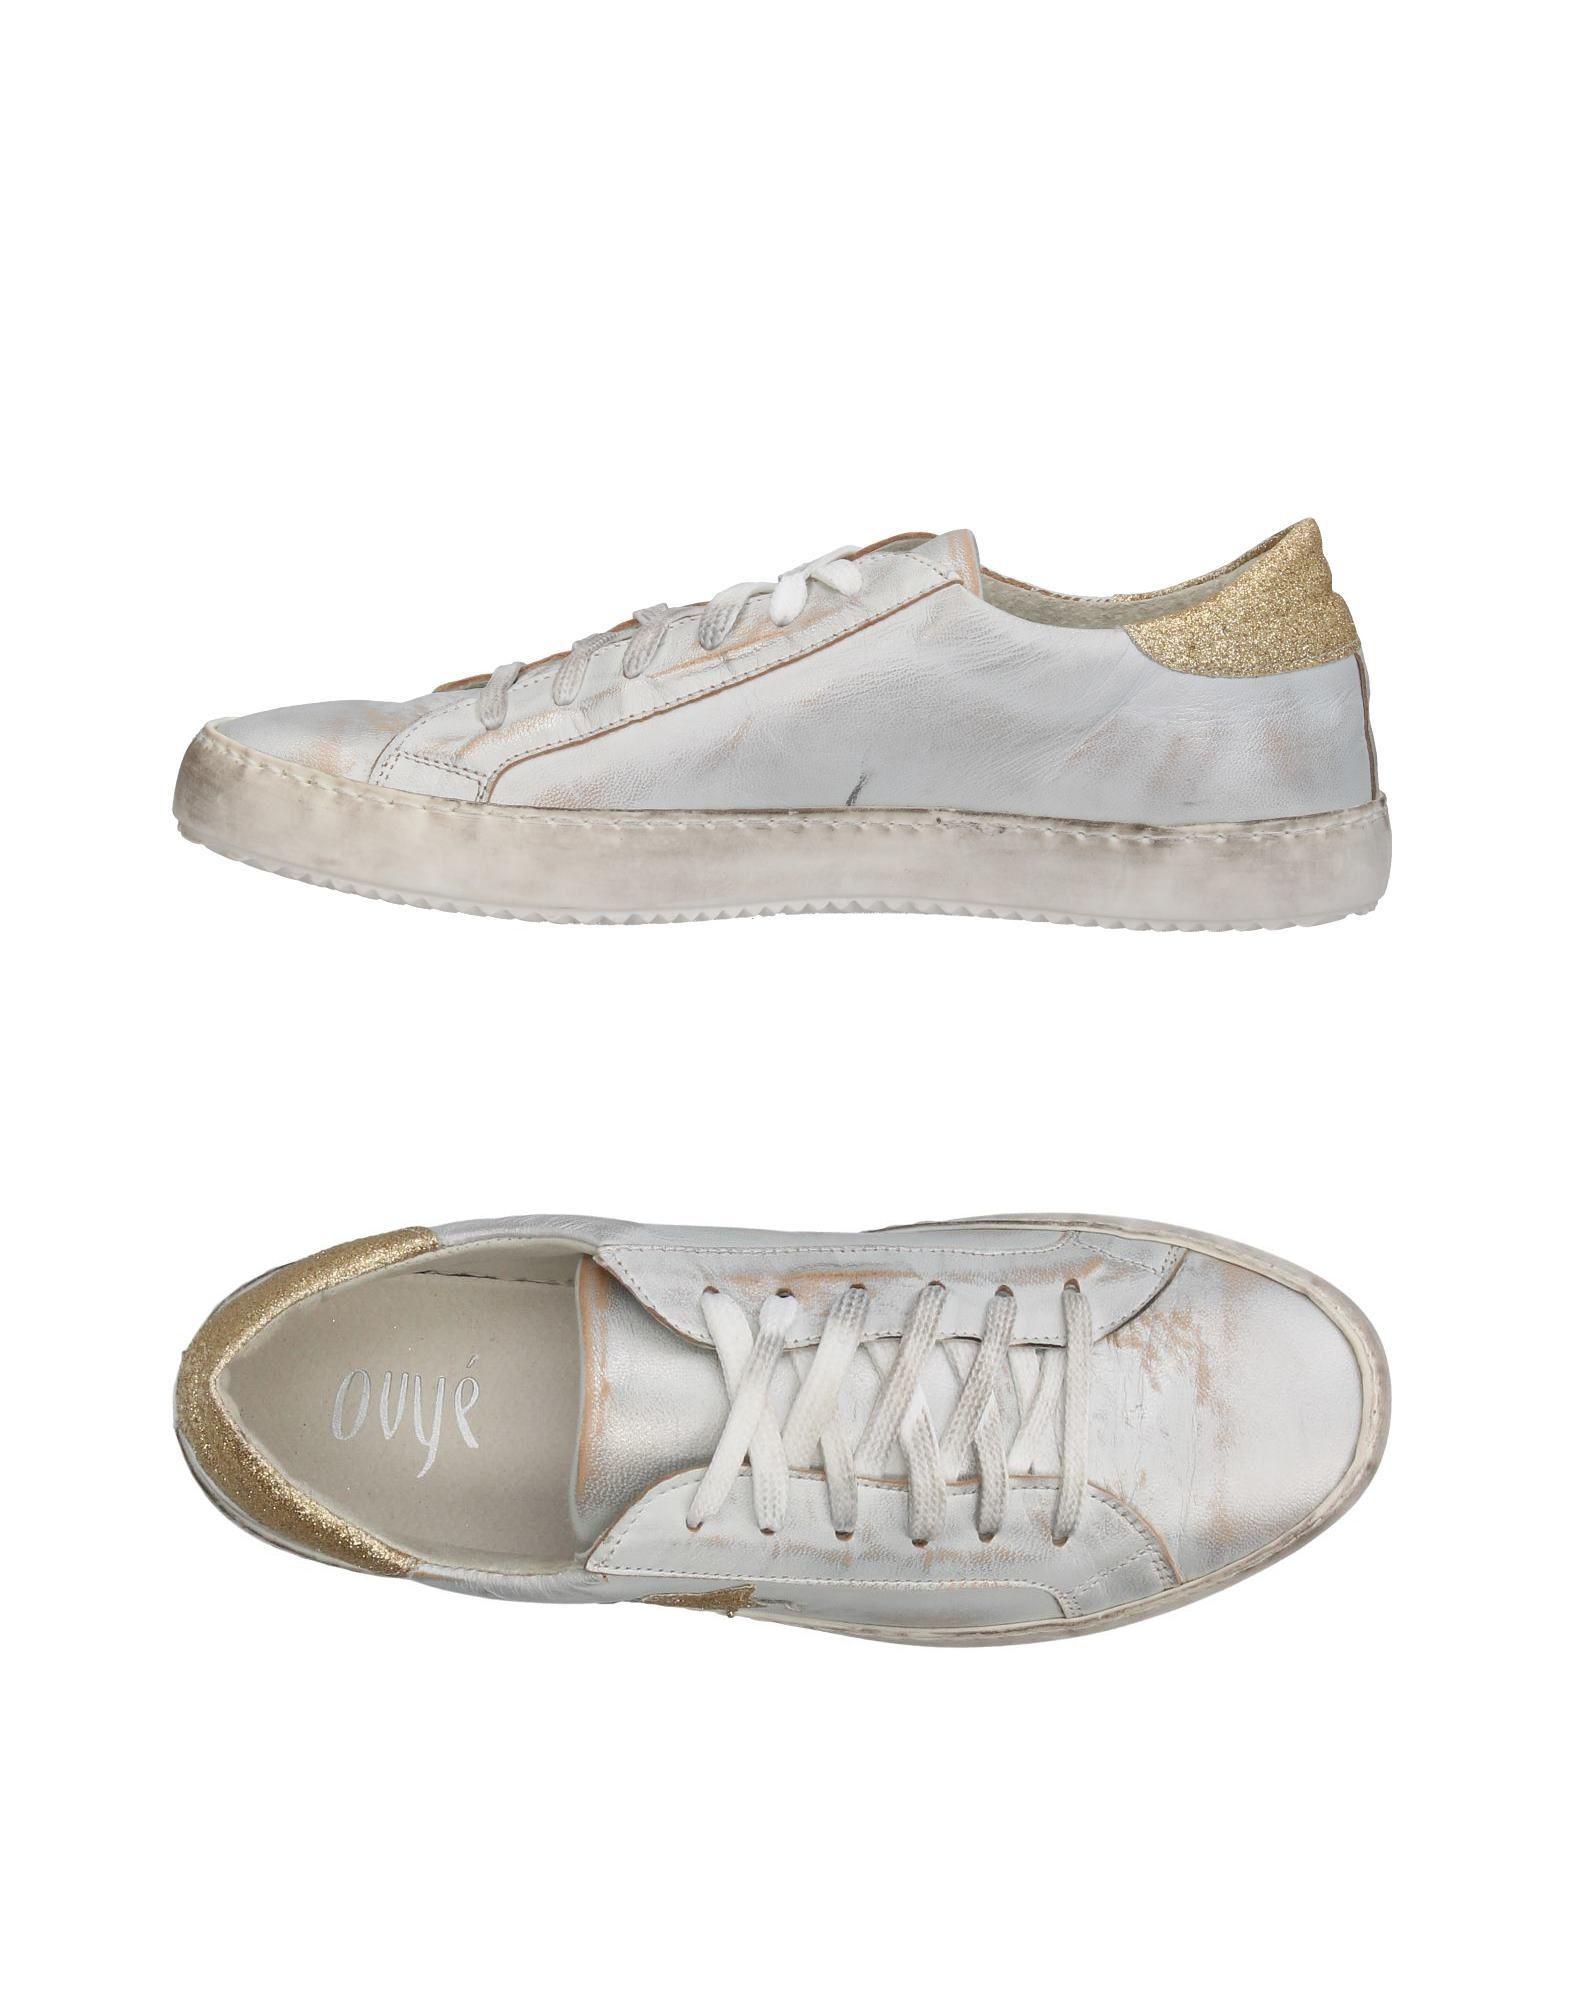 Ovye' By Cristina Lucchi Leather Low-tops & Sneakers in Silver (Metallic)  for Men - Lyst